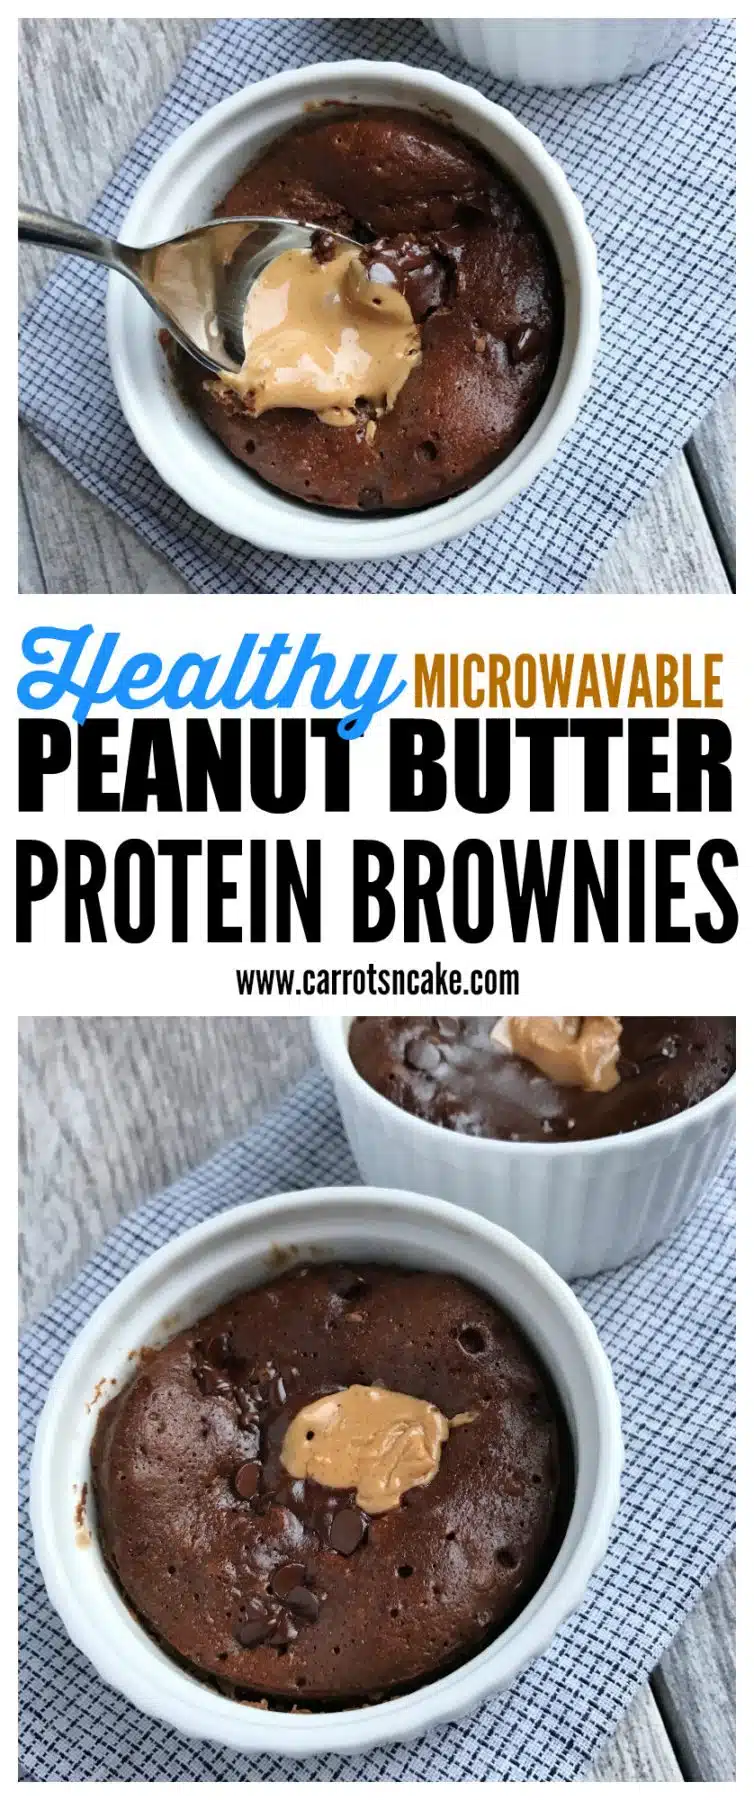 microwavable-peanut-butter-protein-brownies